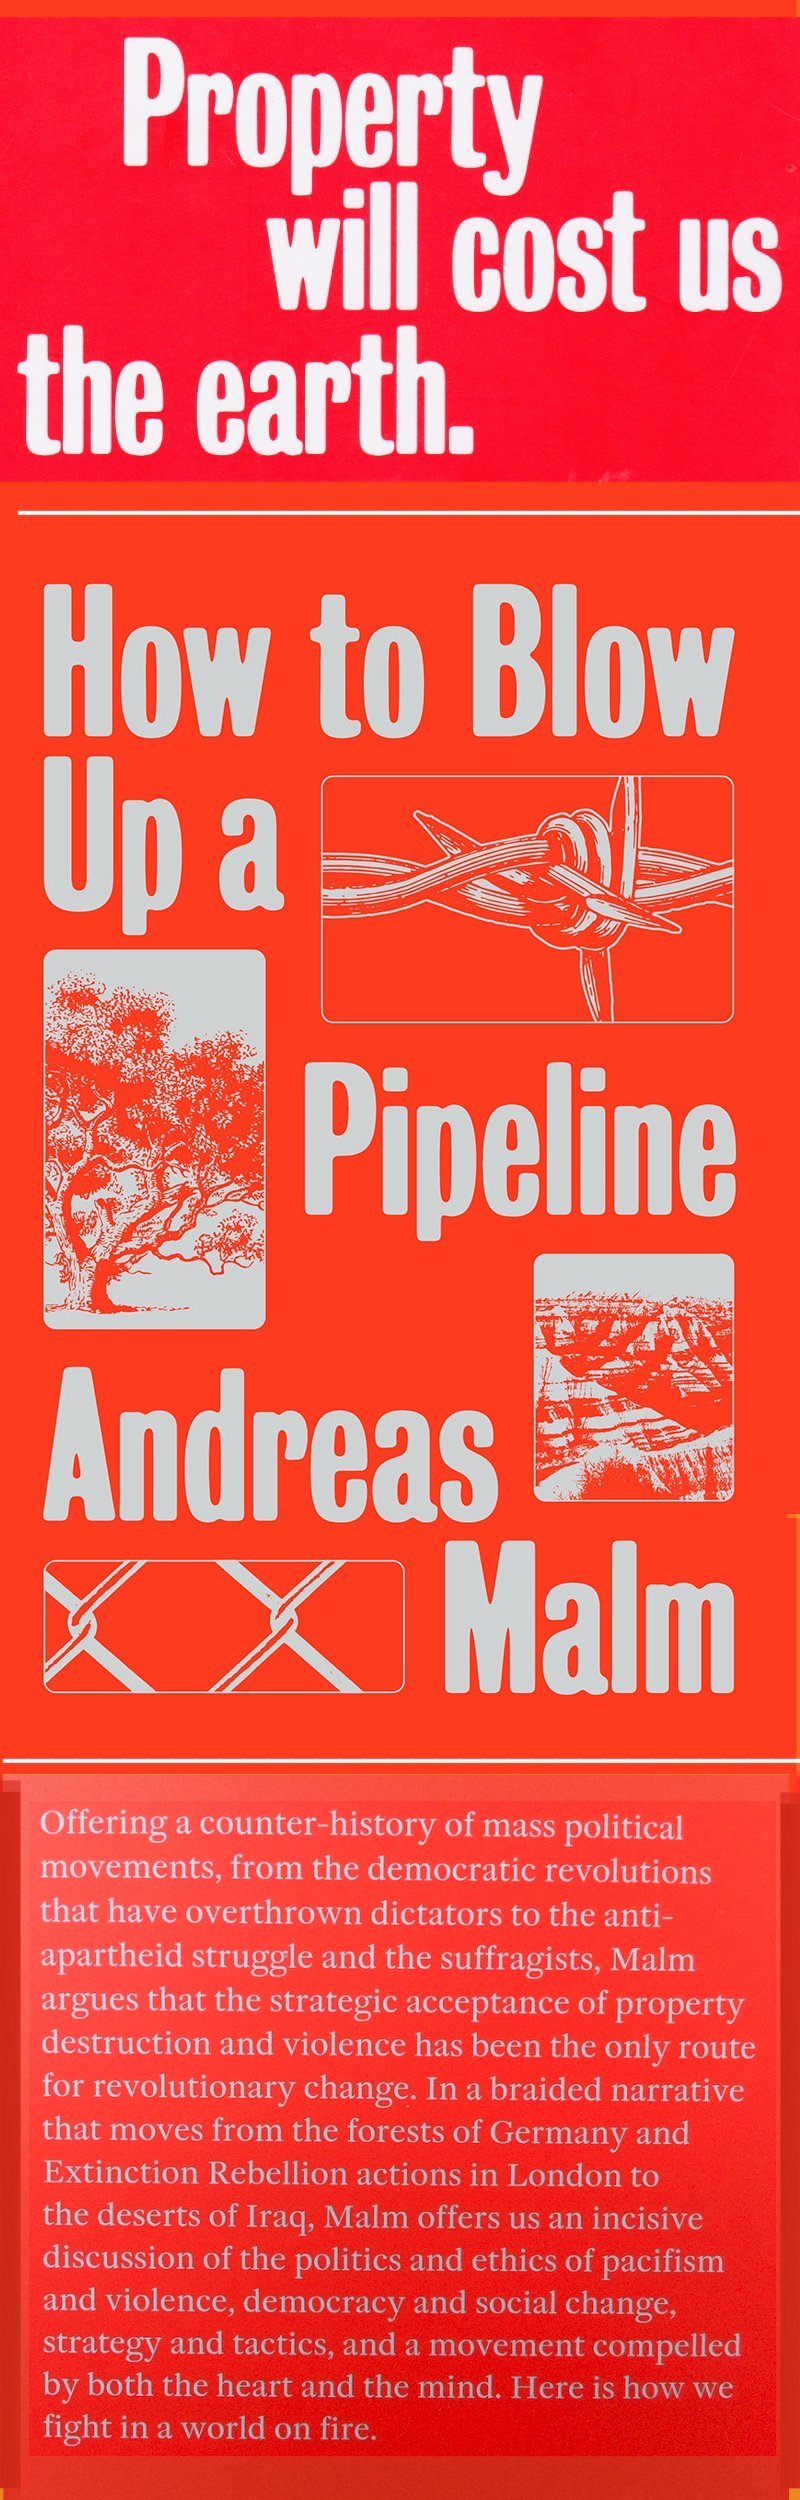 How to Blow Up a Pipeline - Malm